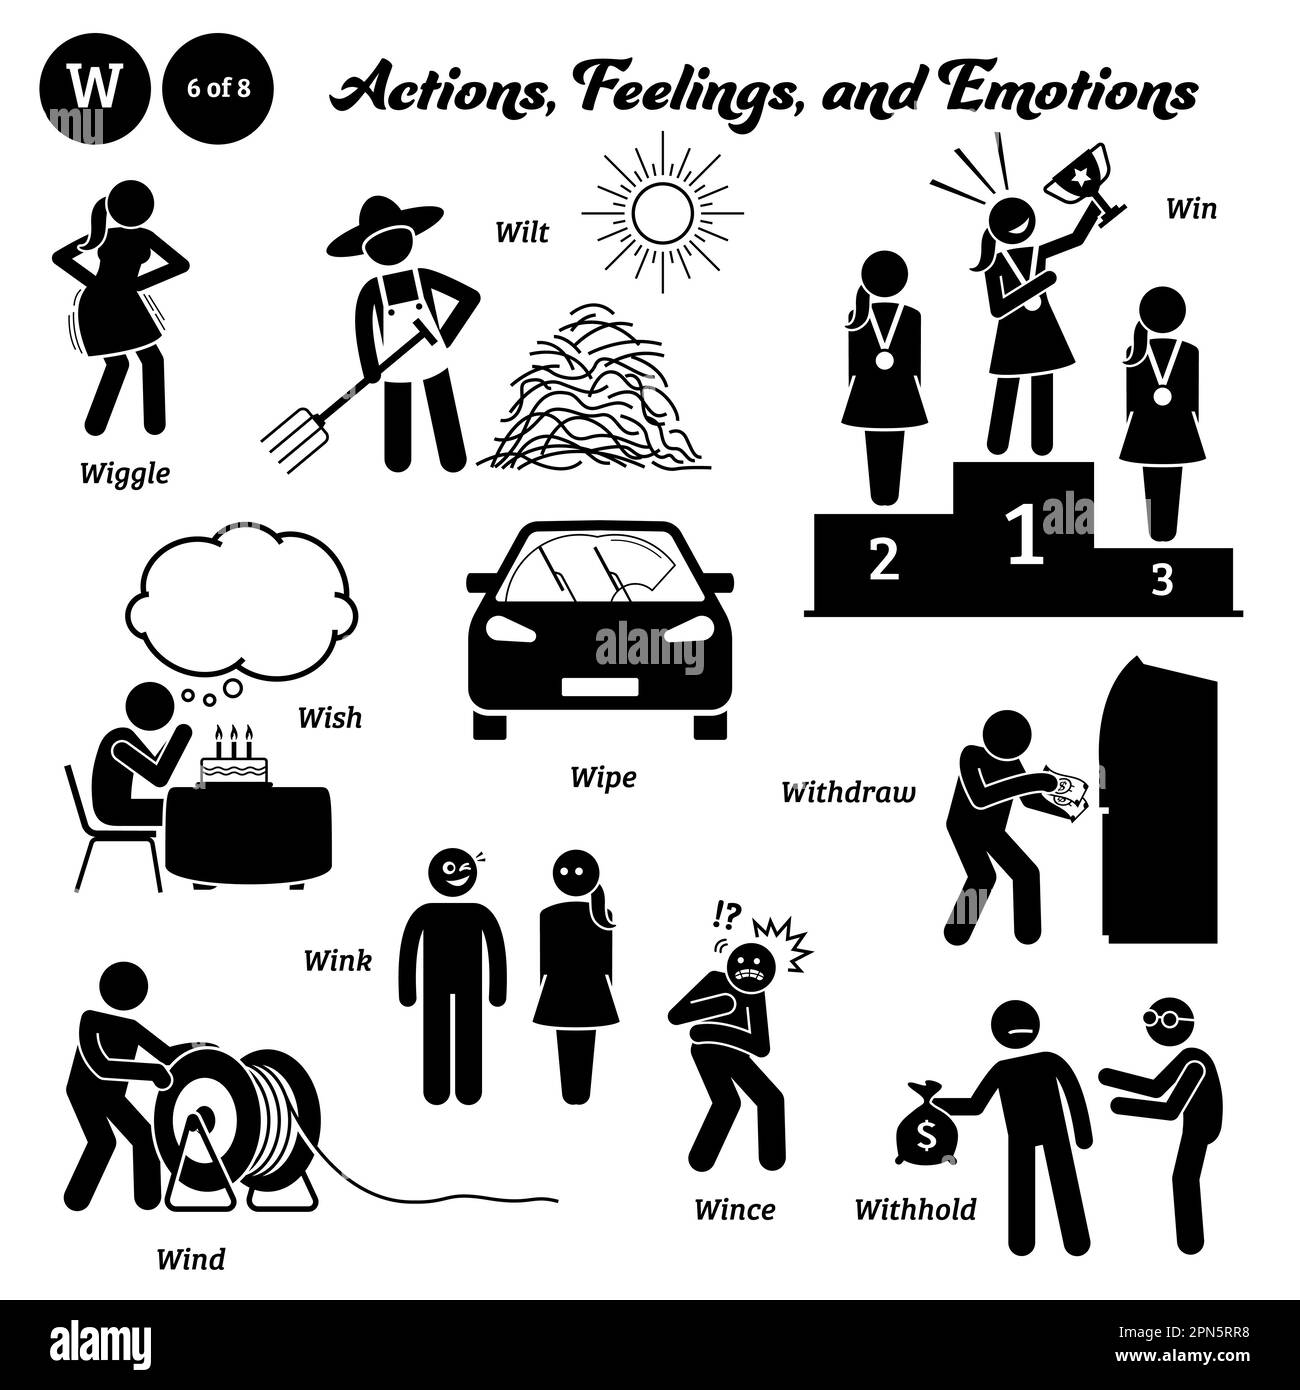 Stick figure human people man action, feelings, and emotions icons alphabet W. Wiggle, wilt, win, wish, wipe, withdraw, wind, wink, wince, and withhol Stock Vector